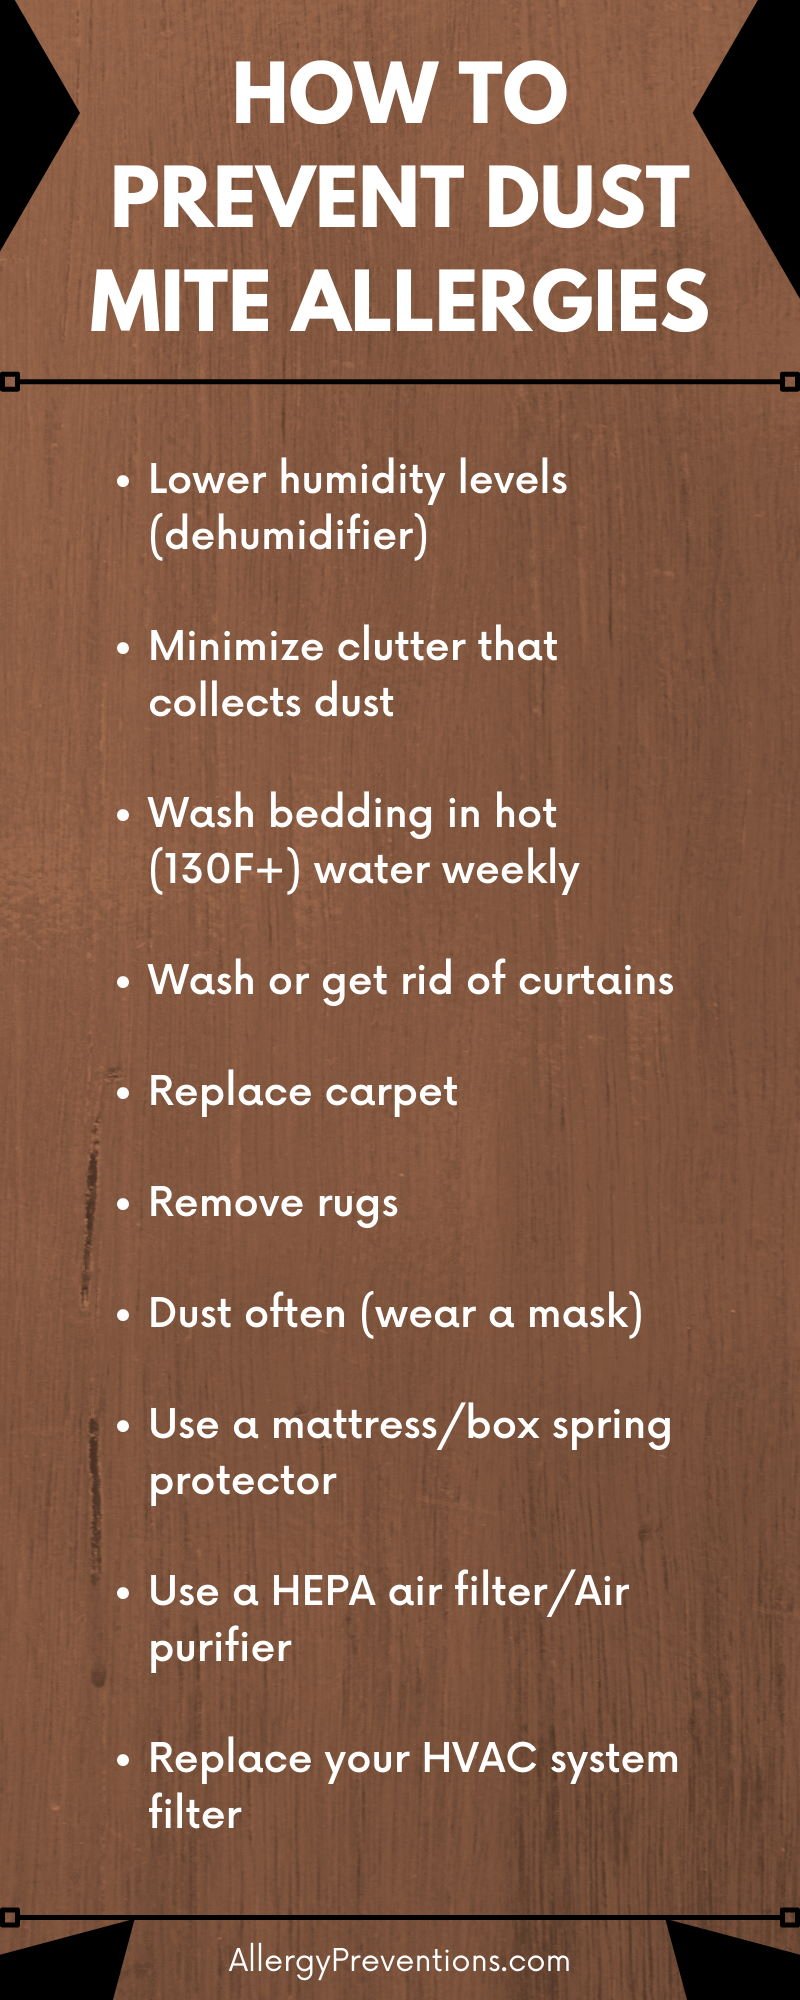 how-to-prevent-dust-mite-allergies-infographic-Lower humidity levels (dehumidifier)  Minimize clutter that collects dust  Wash bedding in hot (130F+) water weekly Wash or get rid of curtains Replace carpet Remove rugs Dust often (wear a mask) Use a mattress/box spring protector Use a HEPA air filter/Air purifier Replace your HVAC system filter 